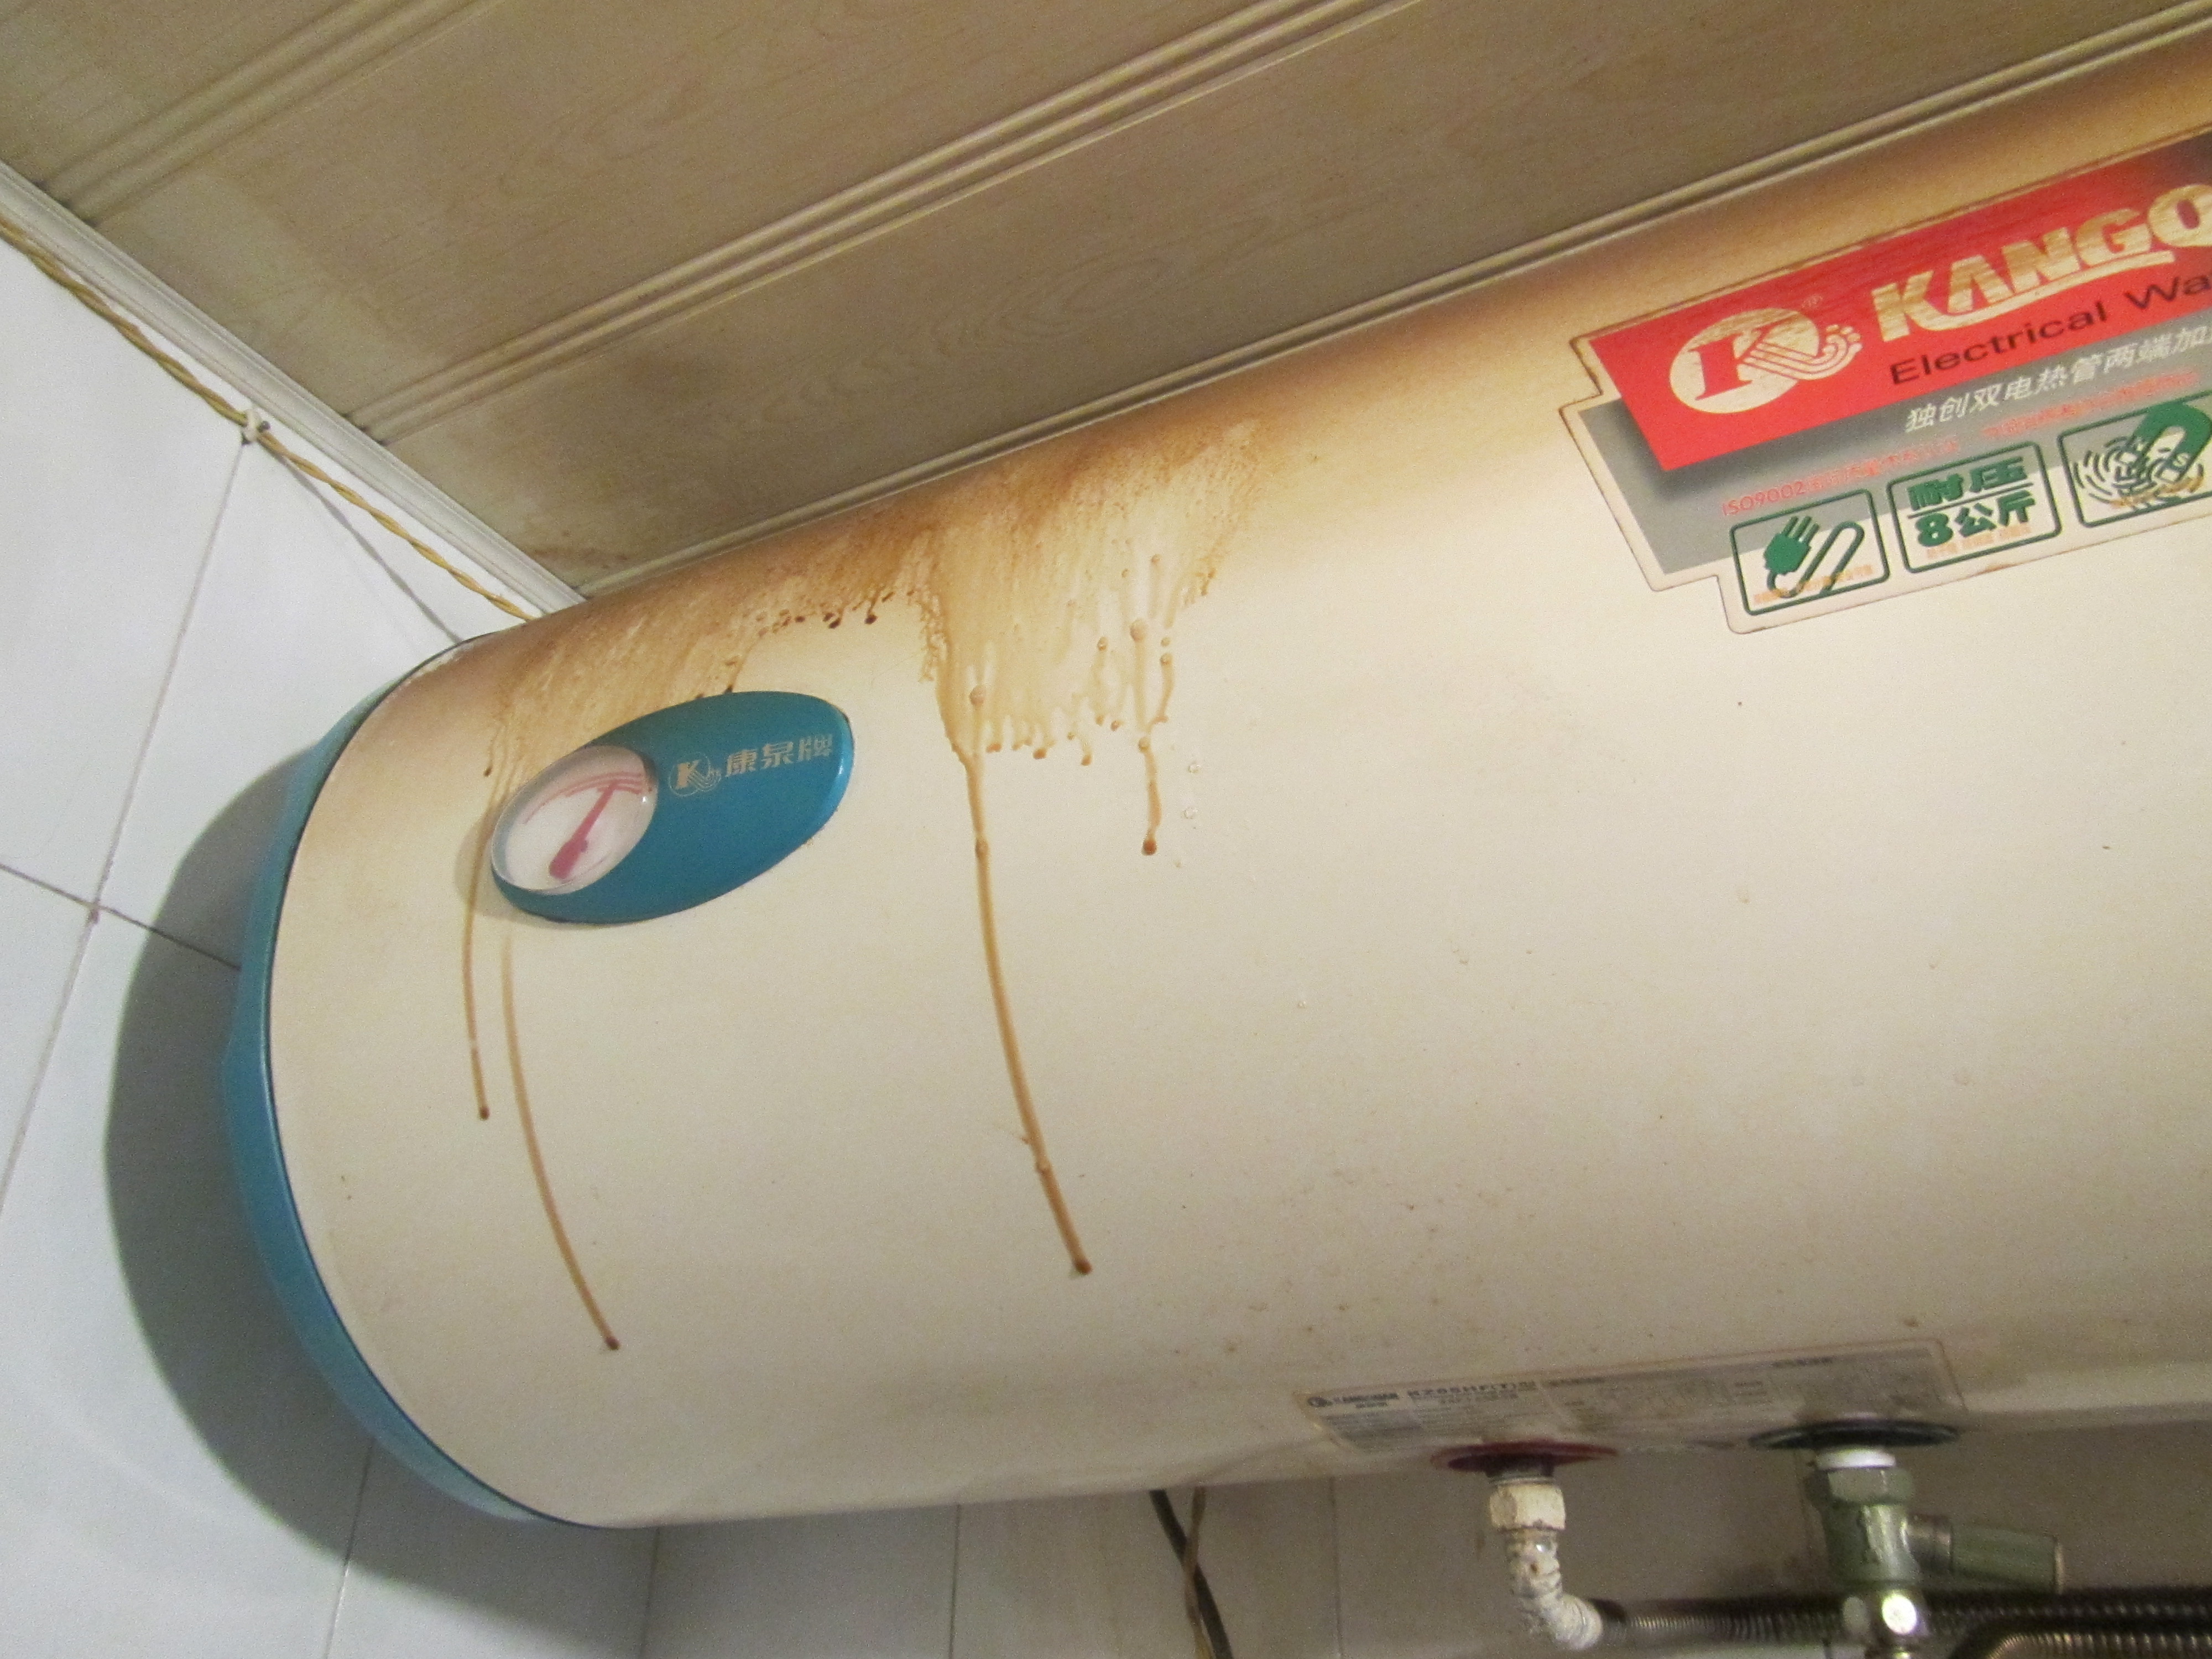 Our hot water tank, before we cleaned it...